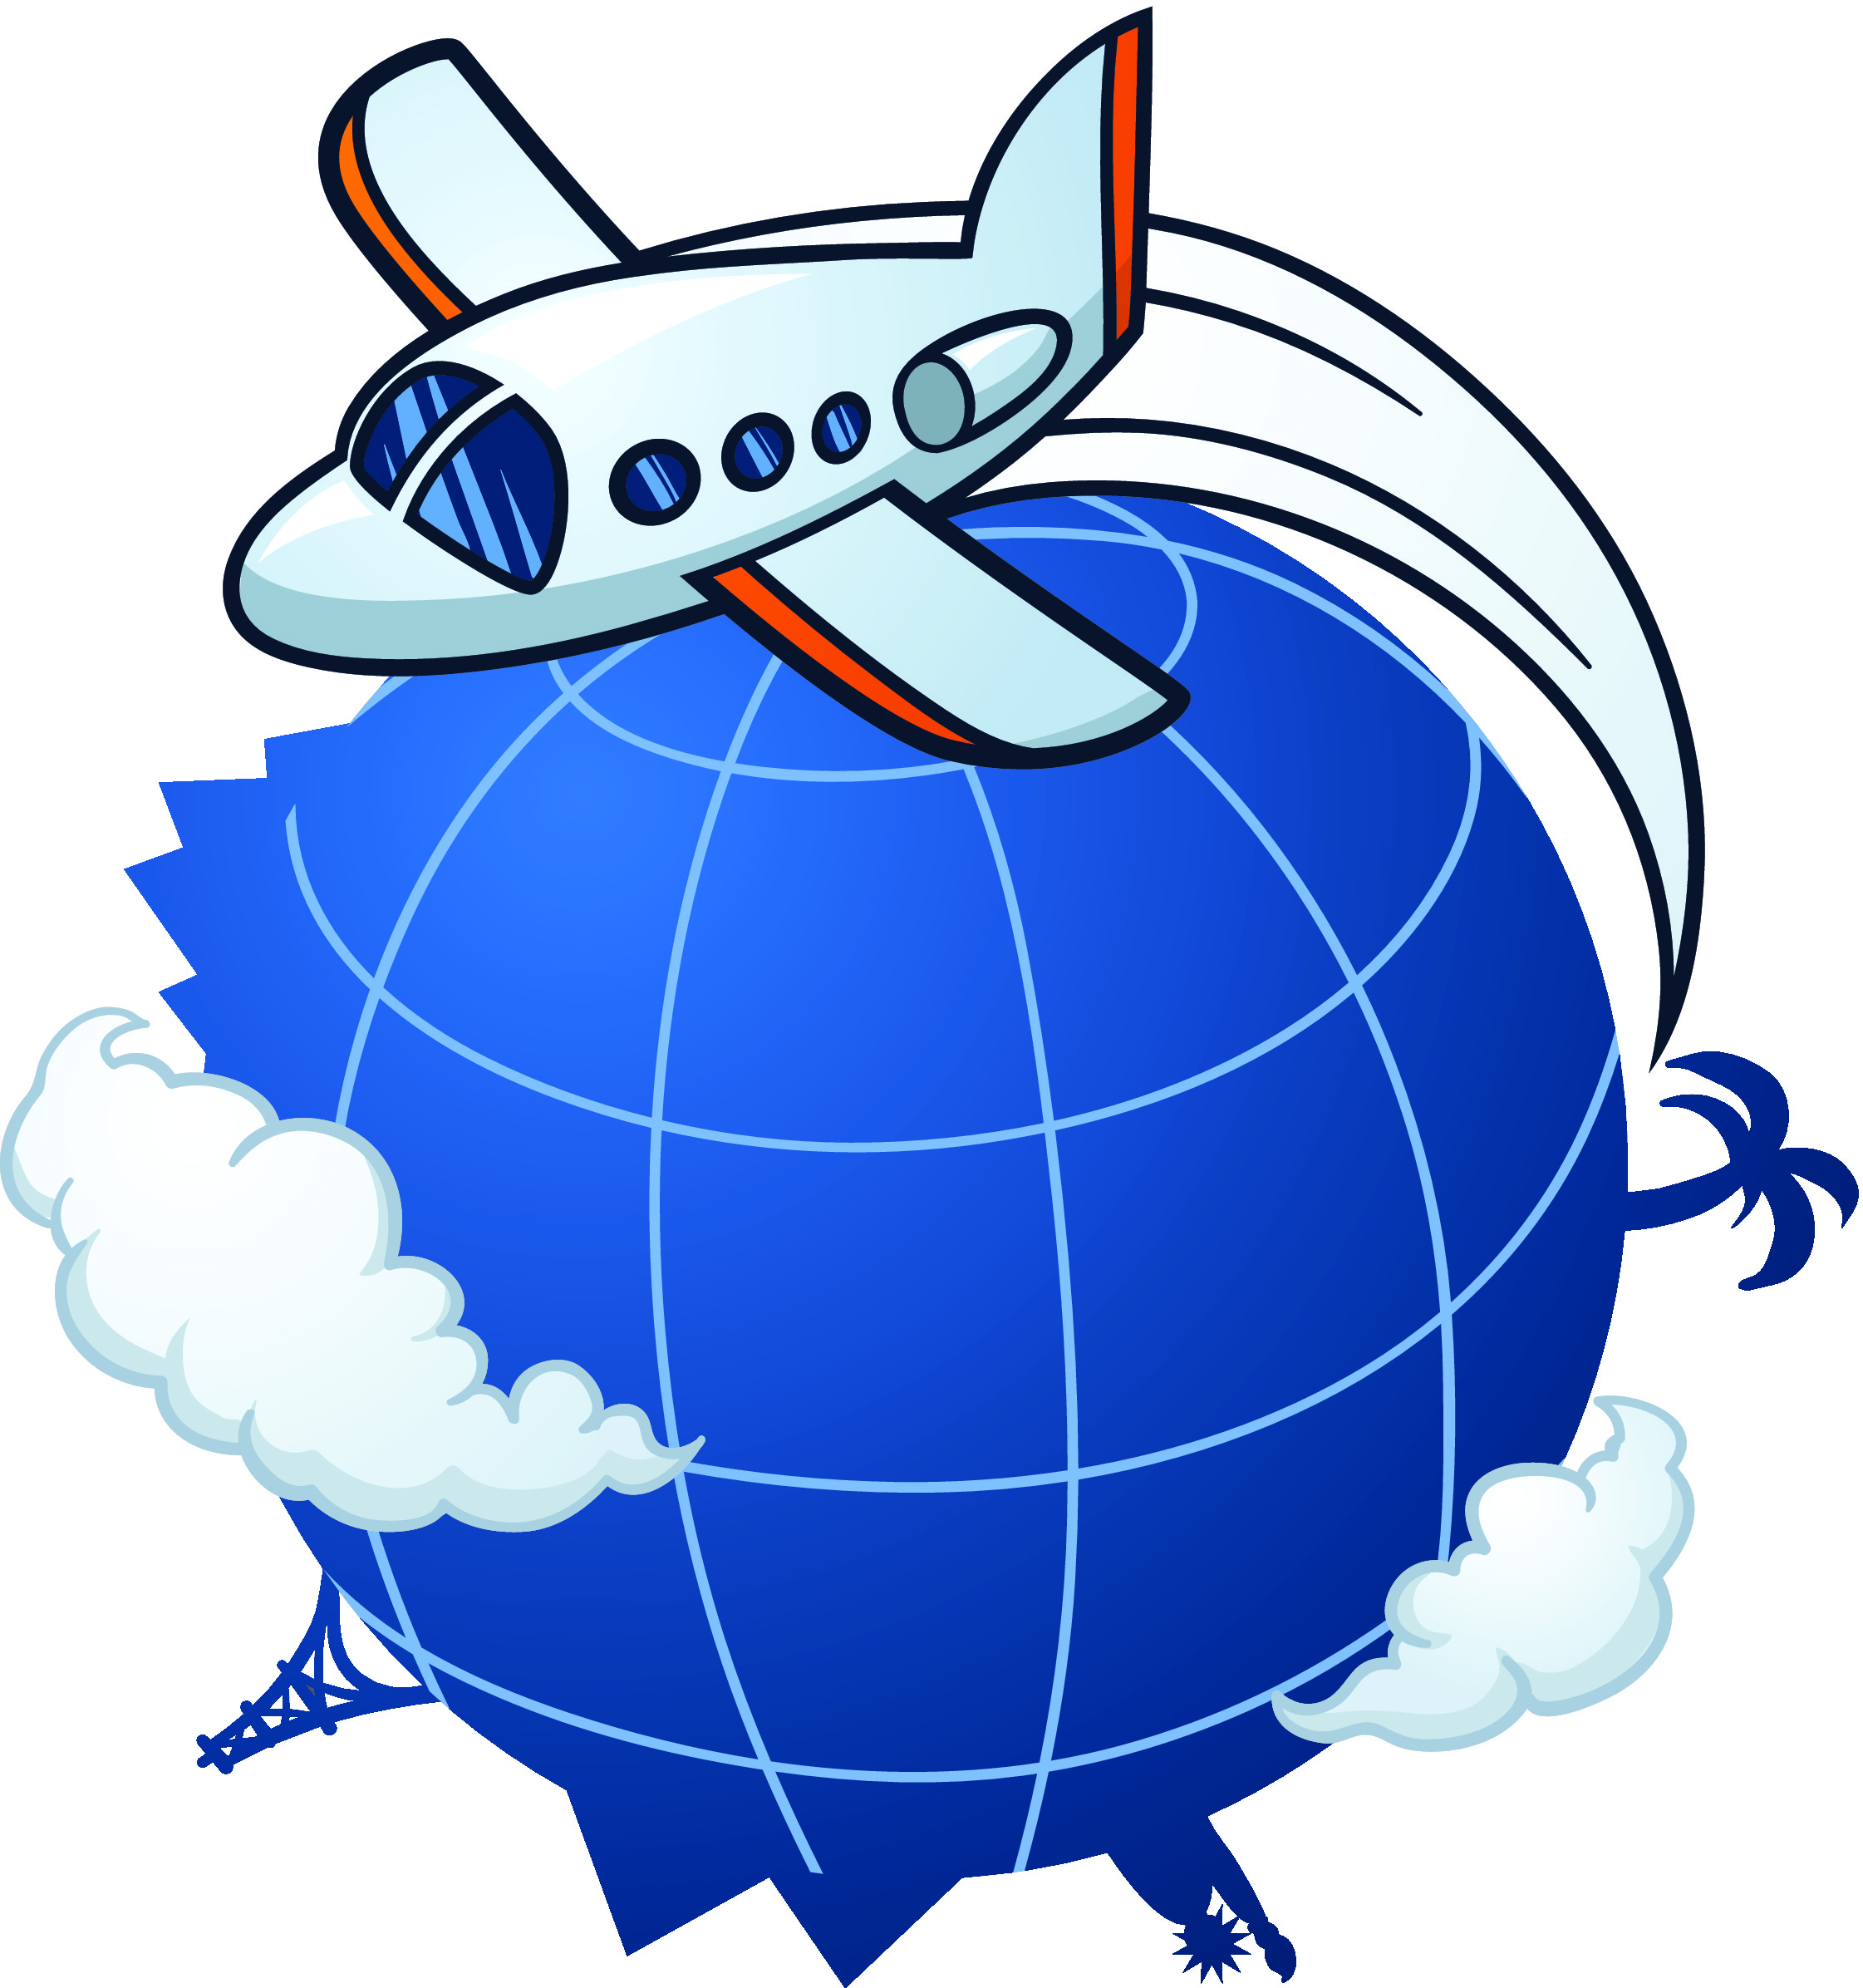 aeroplane cartoon images - Favourite Pictures